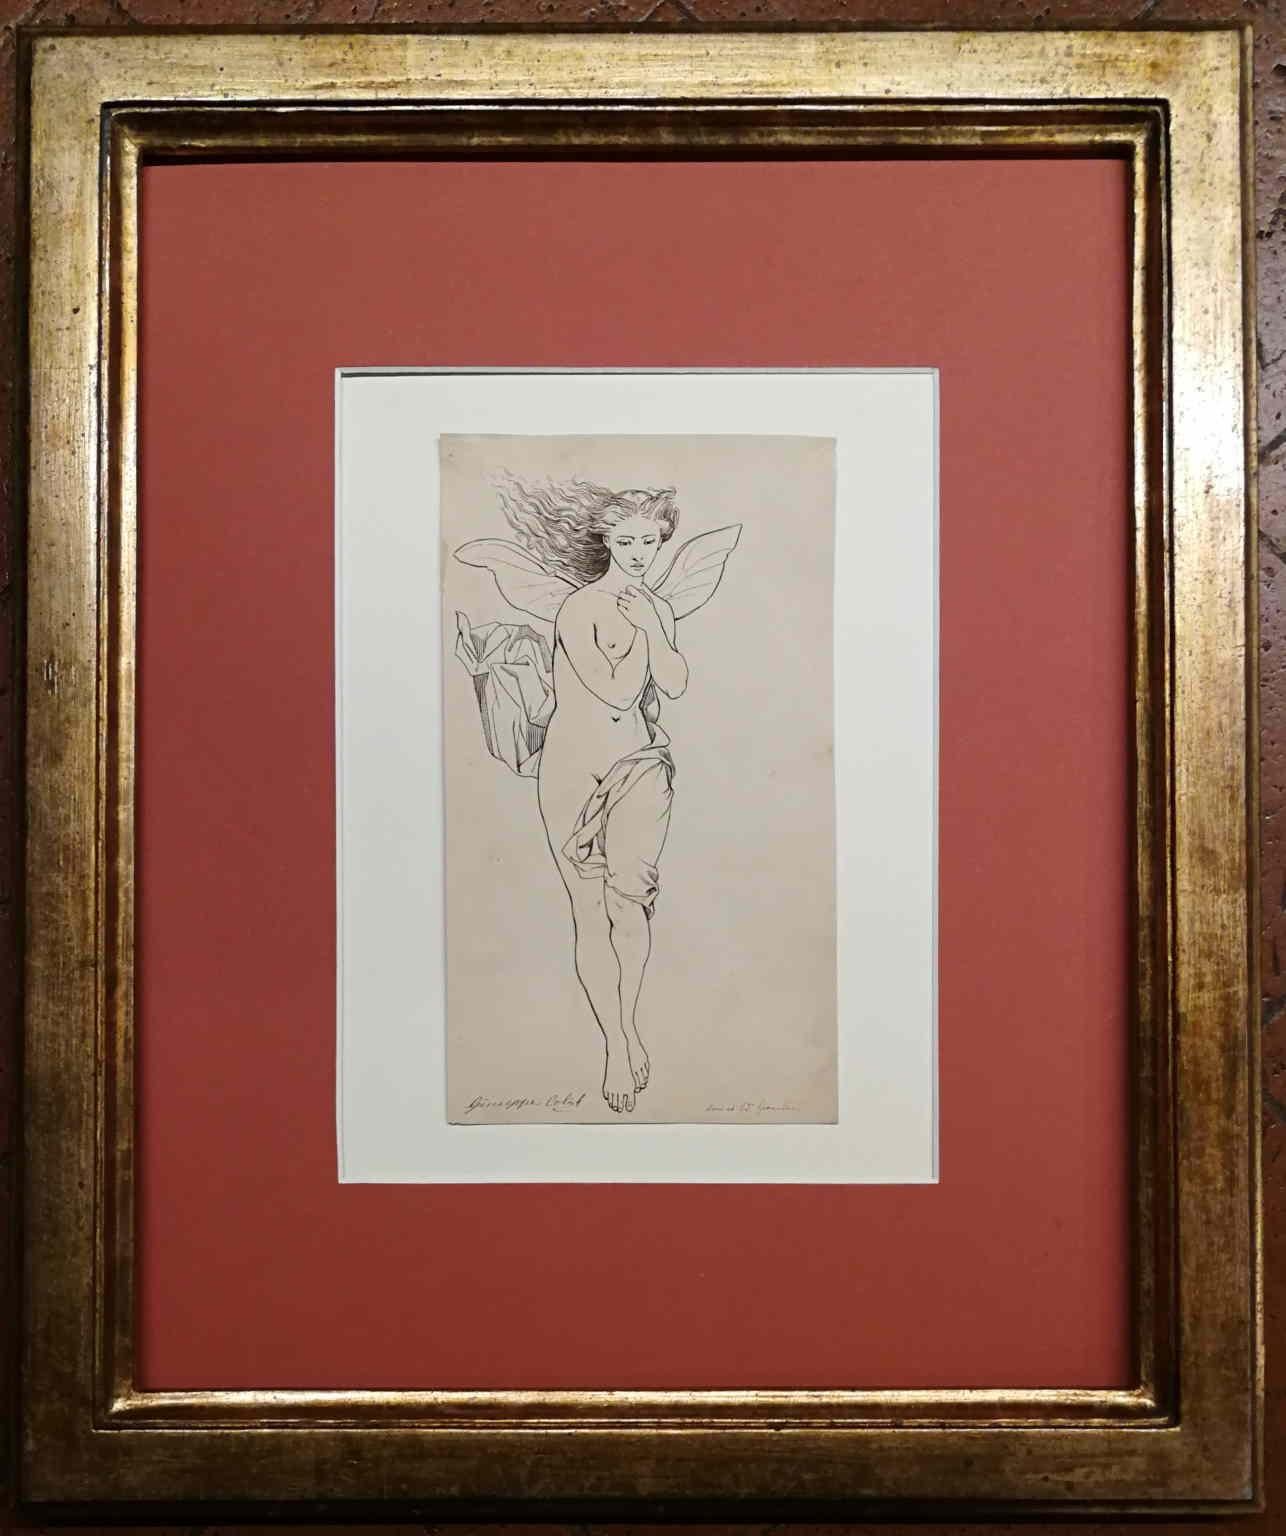 Giuseppe Calì, Psyche, end 19th-early 20th, ink on paper, signed 8